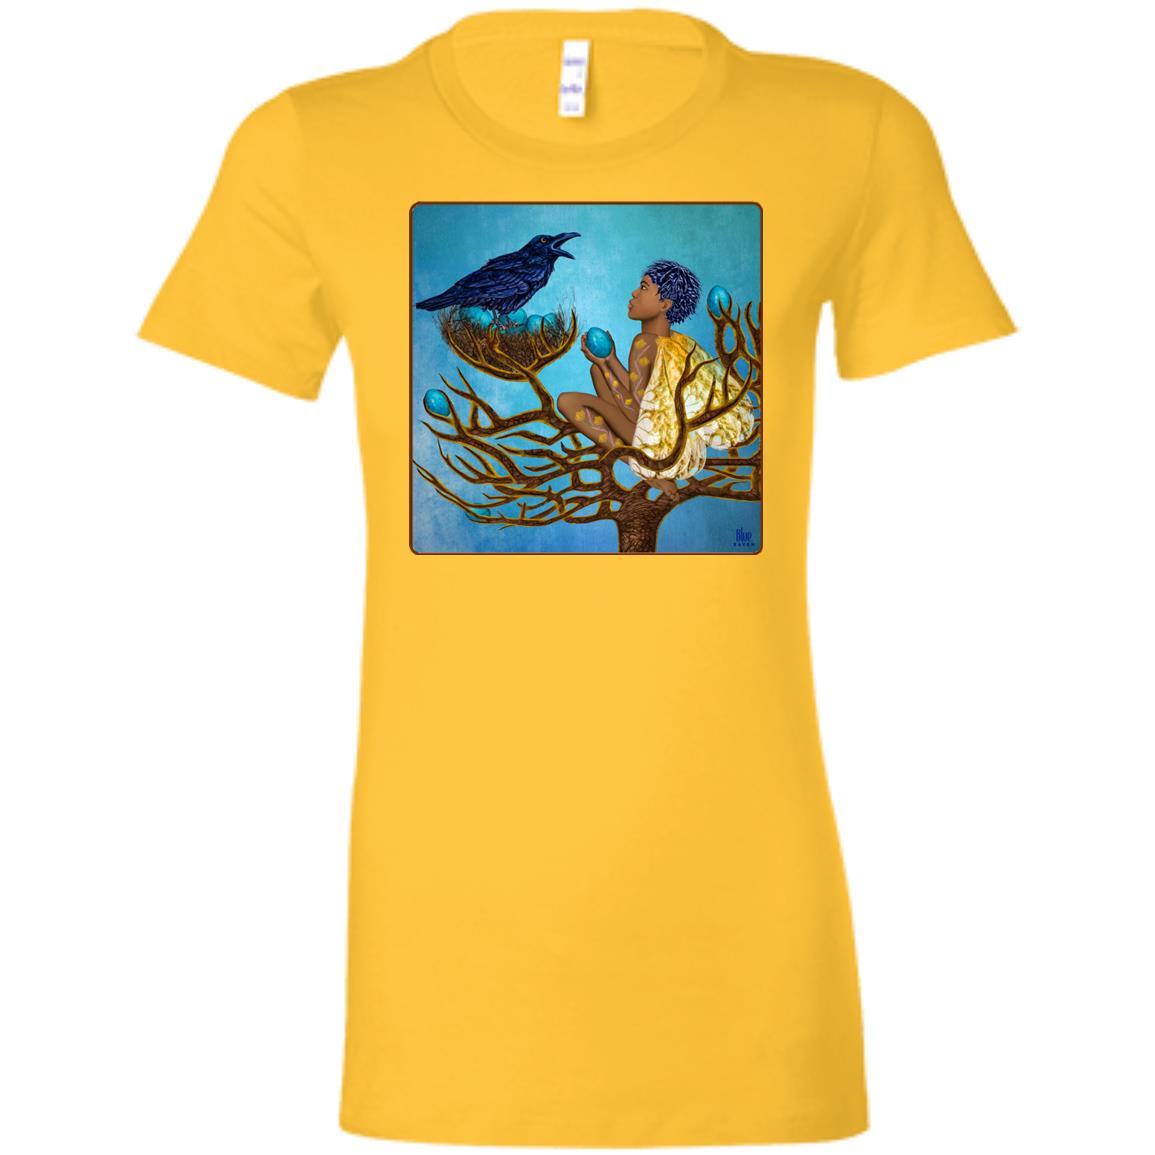 The blue raven's friend - Women's Fitted T-Shirt